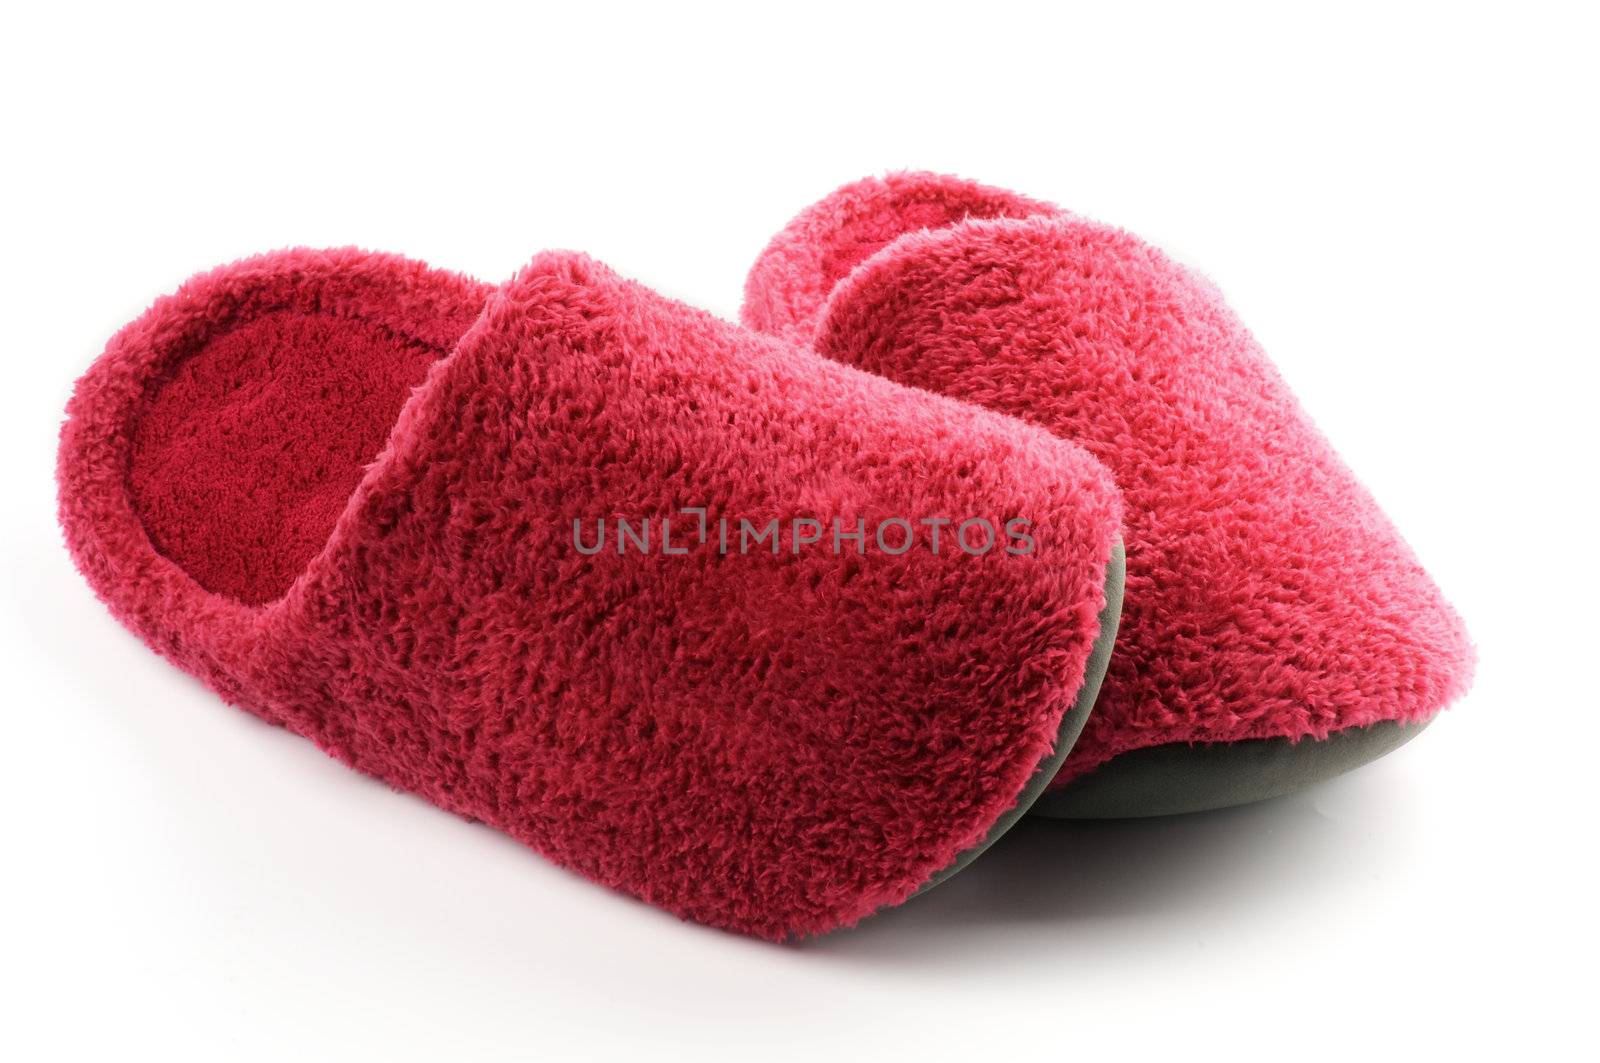 Magenta Slippers Confuse by zhekos